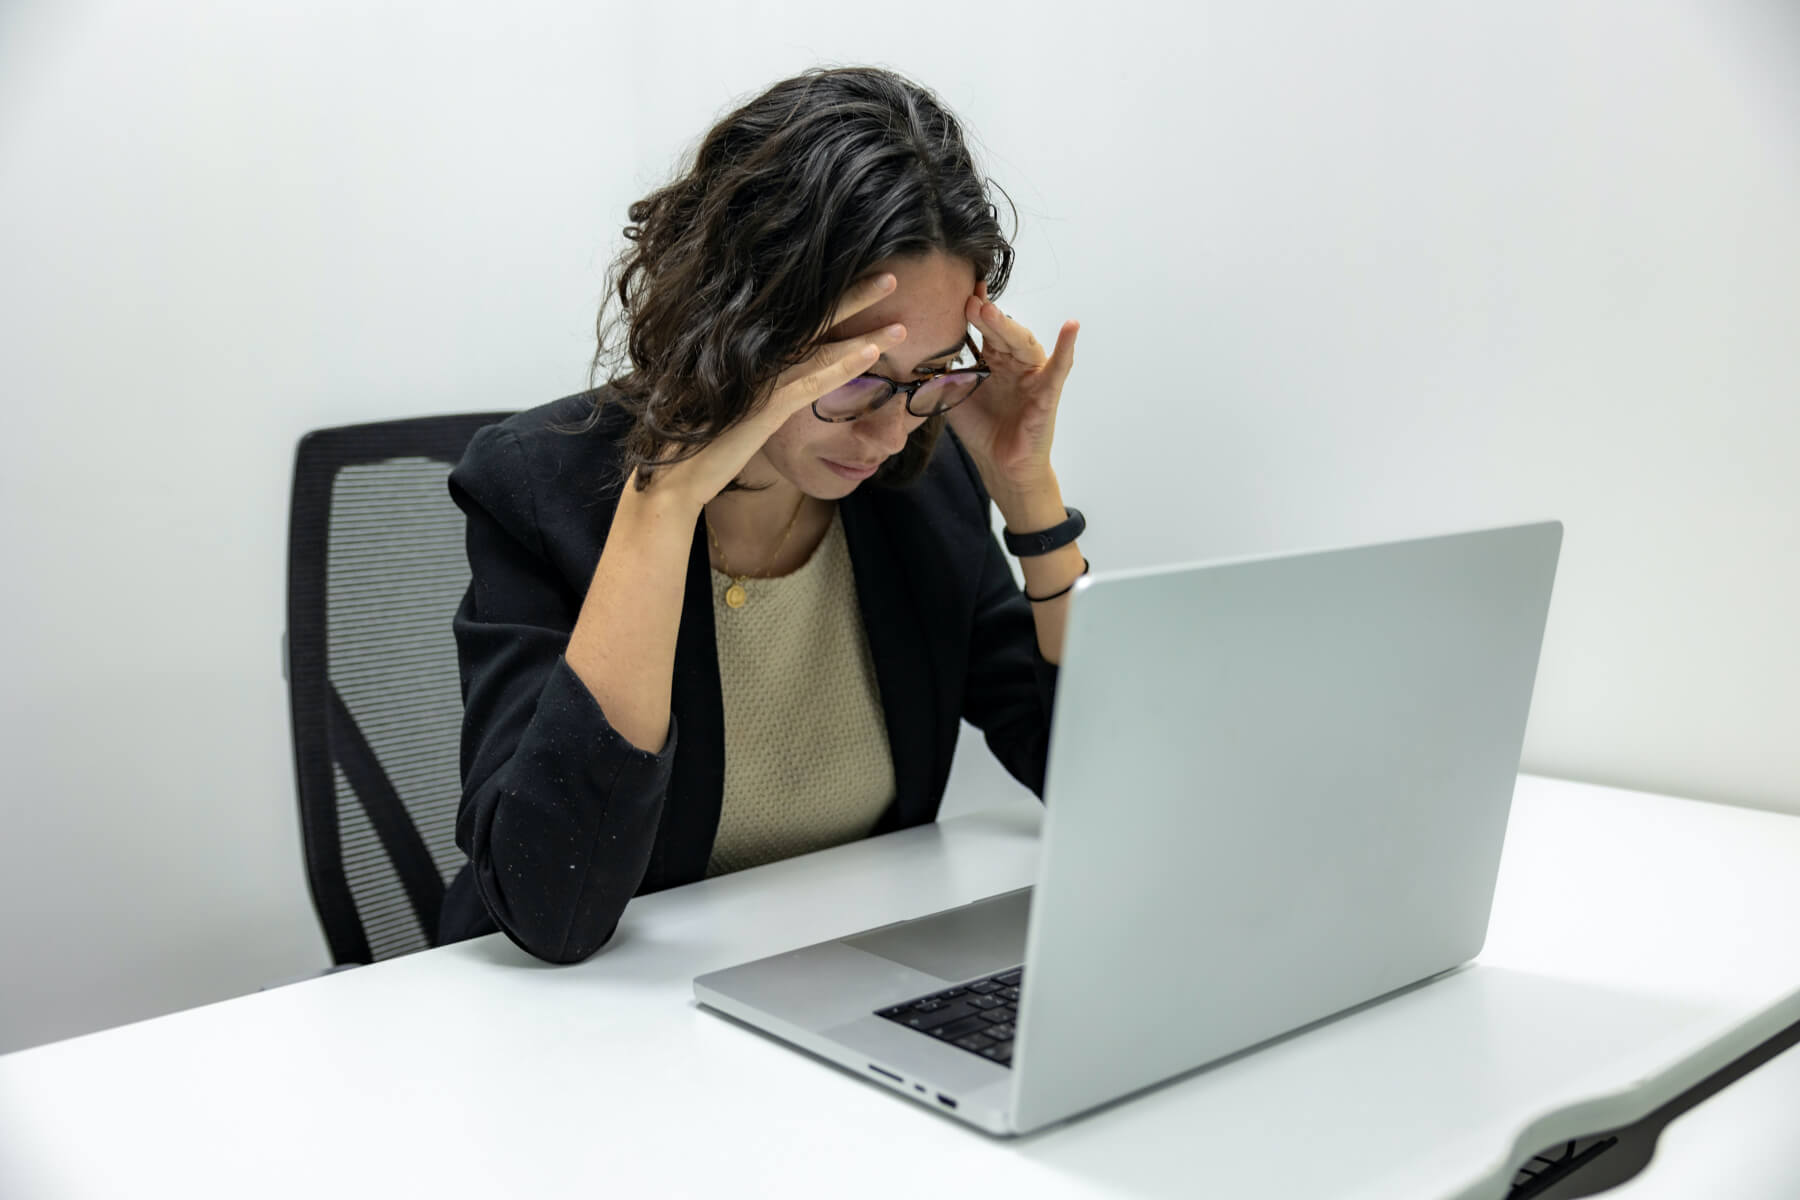 Woman with a headache working at a laptop computer